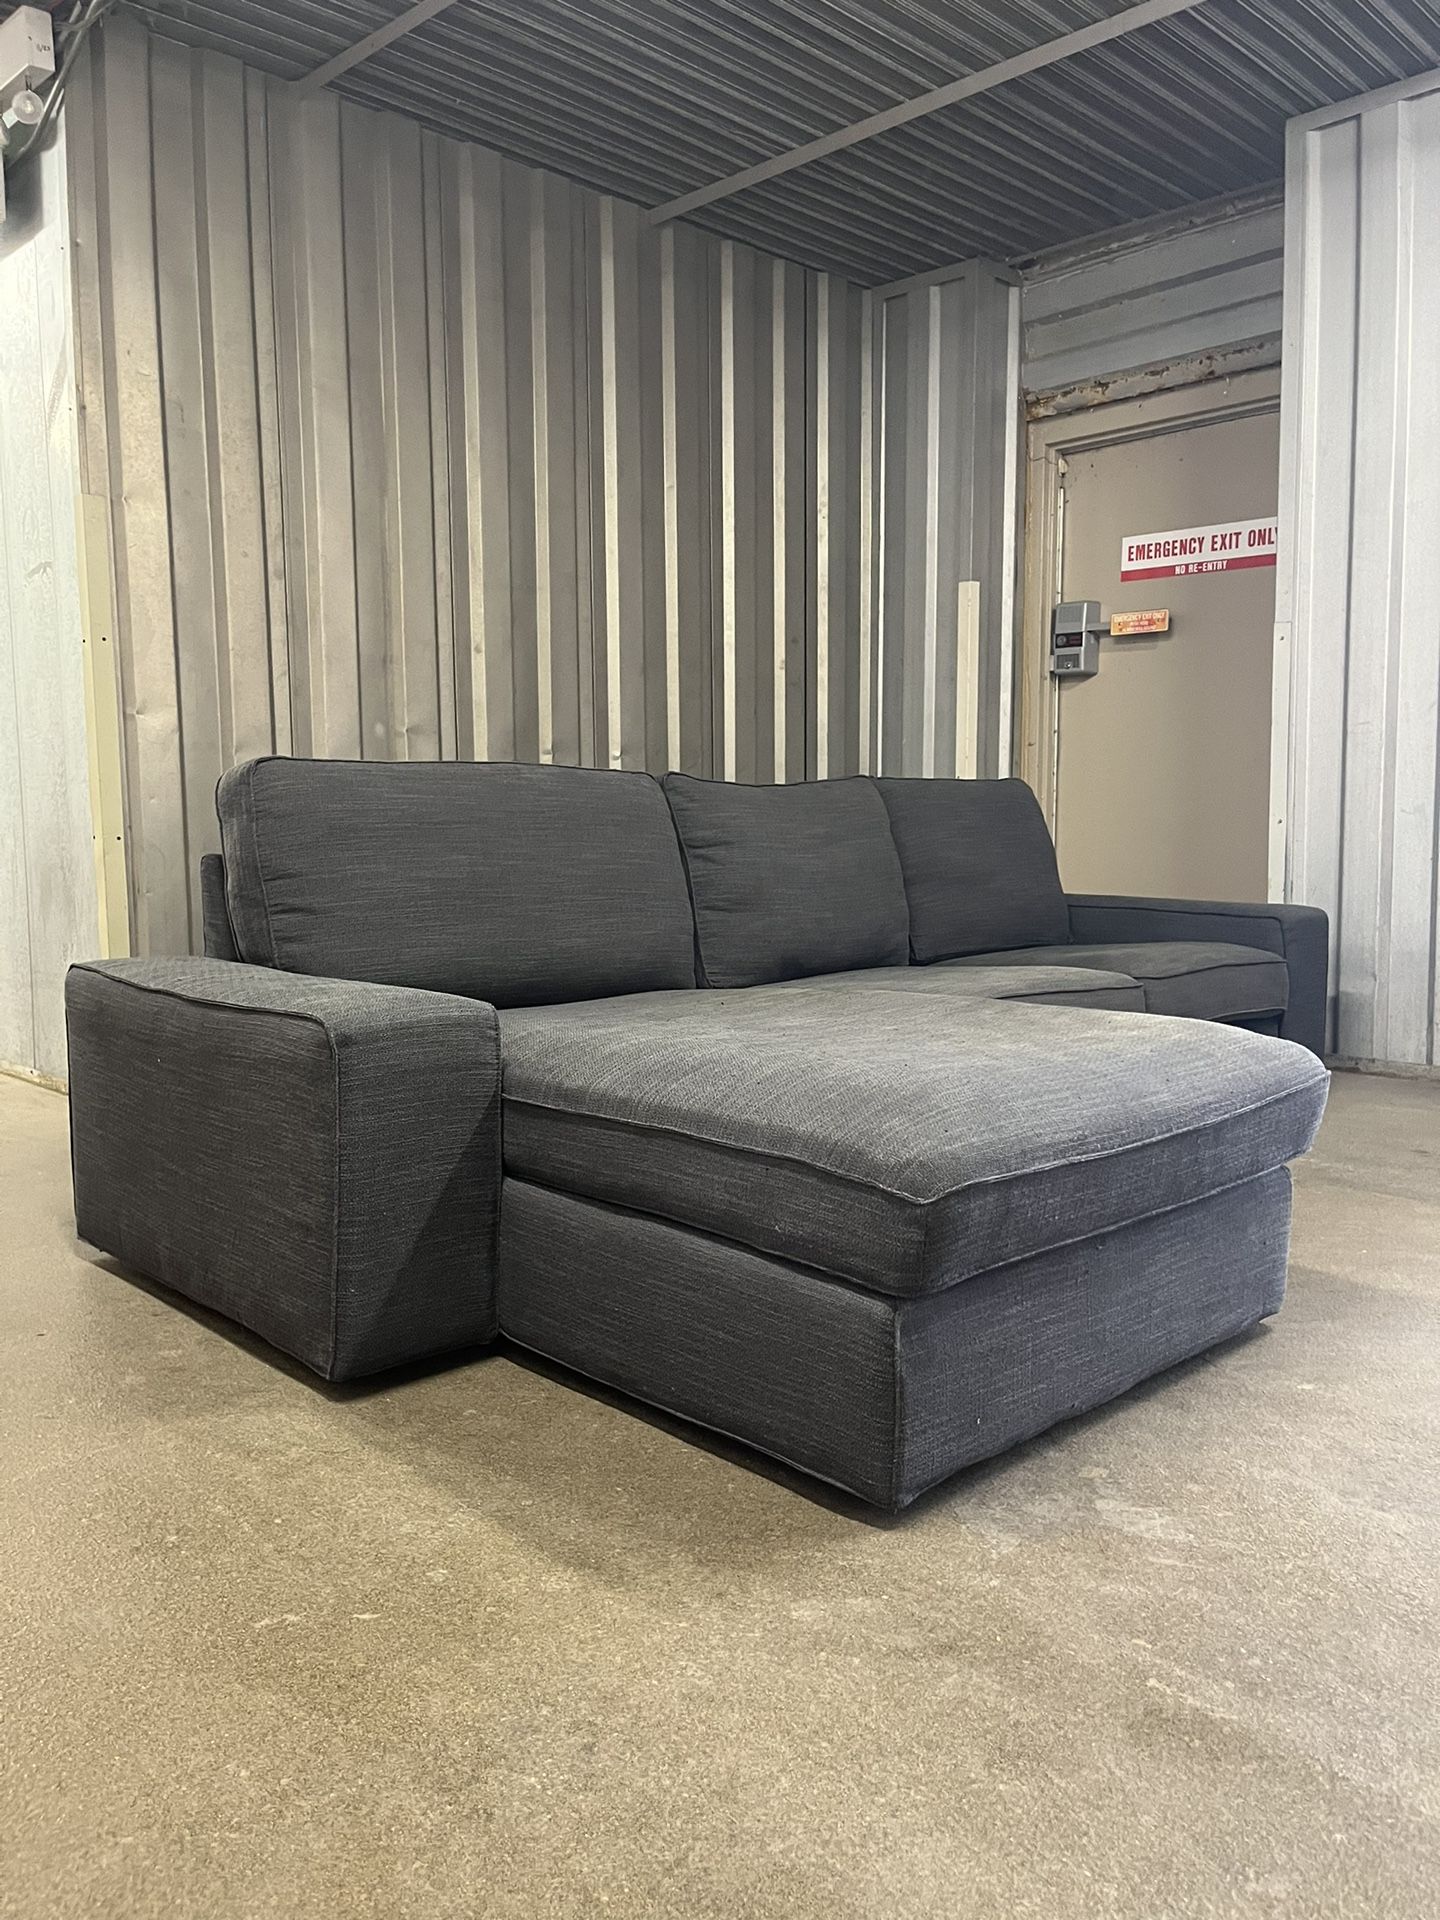 IKEA Kivik Sectional Couch